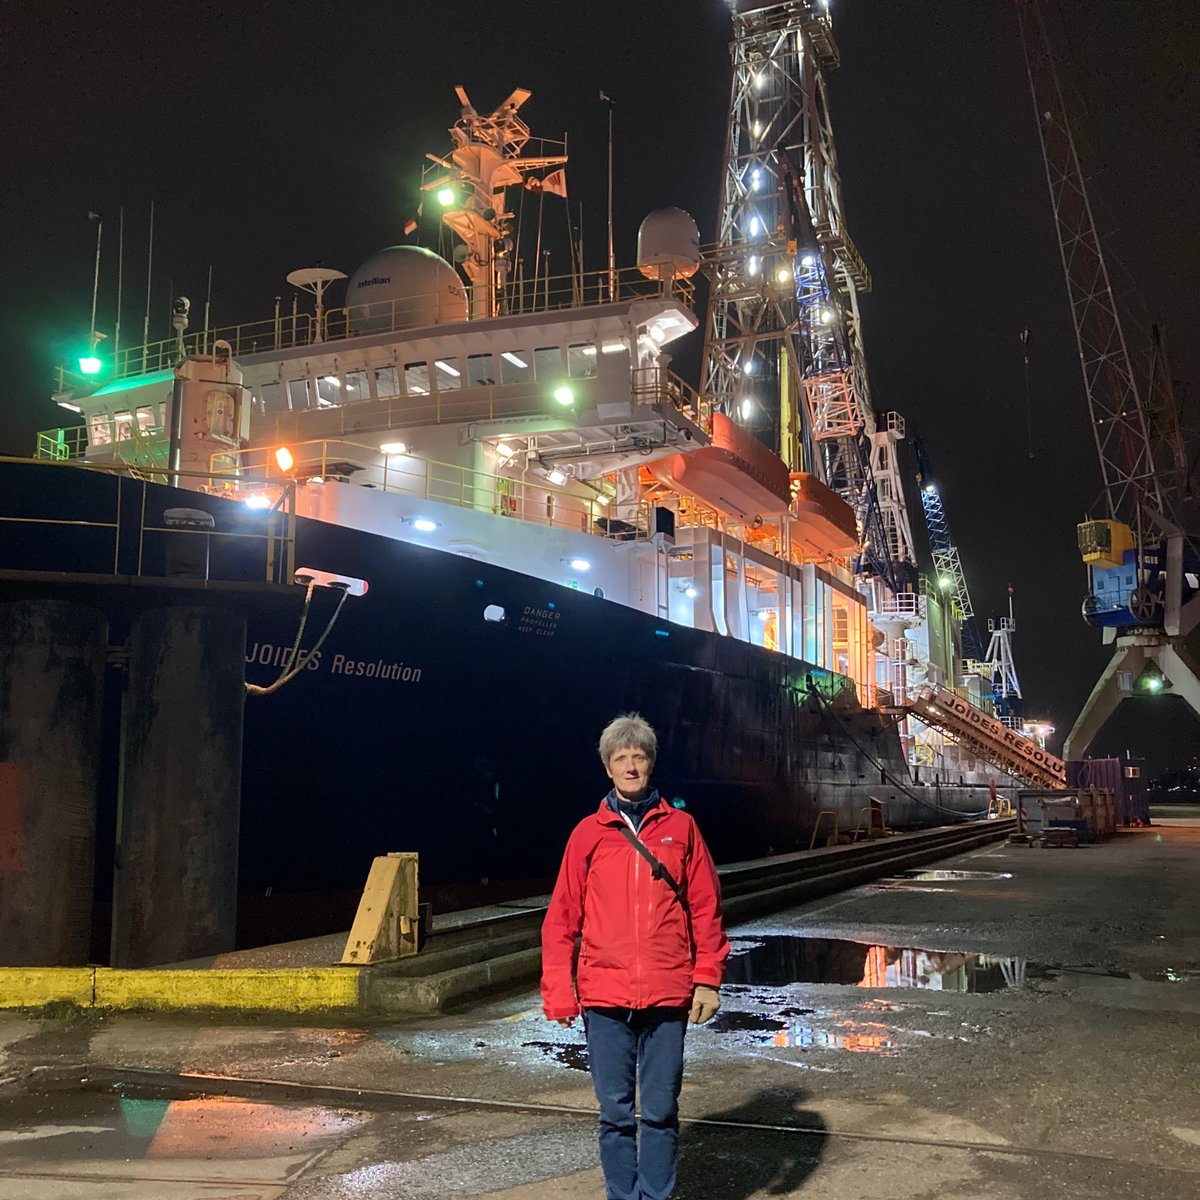 Exciting News! Geography's Rachel Flecker & the Exp401 team have set sail from Amsterdam to embark on their offshore drilling mission, retrieving data from the Straits of Gibraltar for the IMMAGE project! Follow their journey at immageland2sea.ac.uk and @IMMAGEland2sea! 🌍🚢